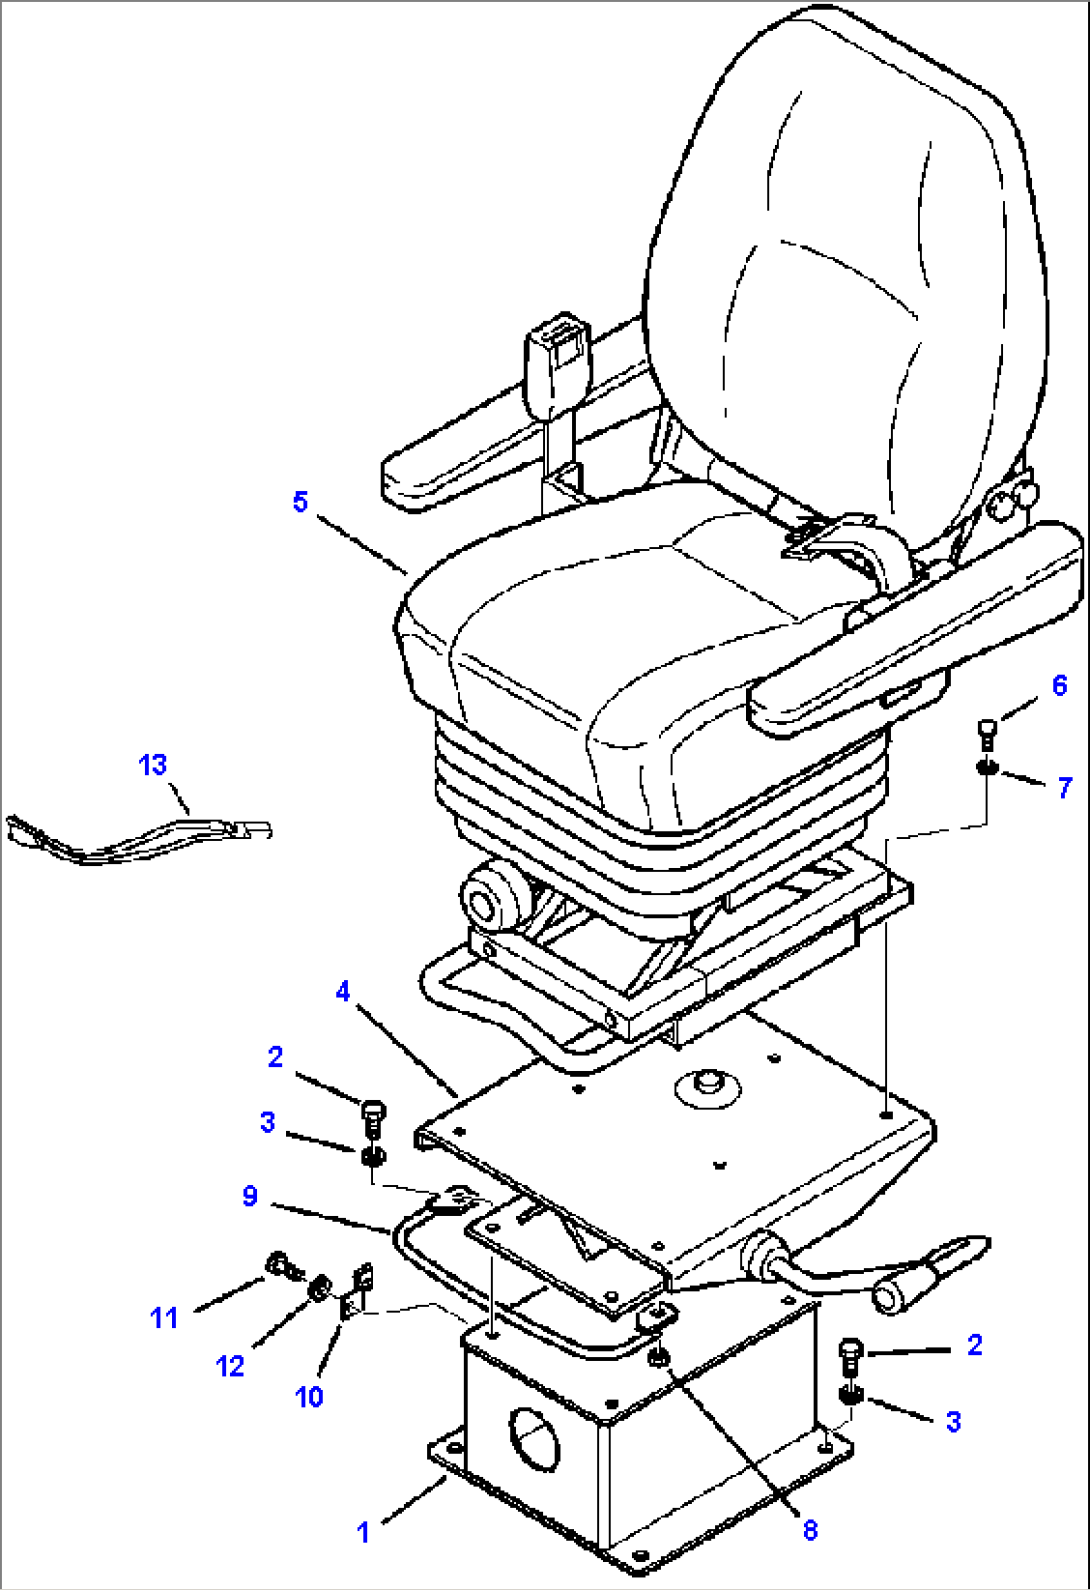 K5013-01A0 CAB ASSEMBLY OPERATORS SEAT MOUNTING